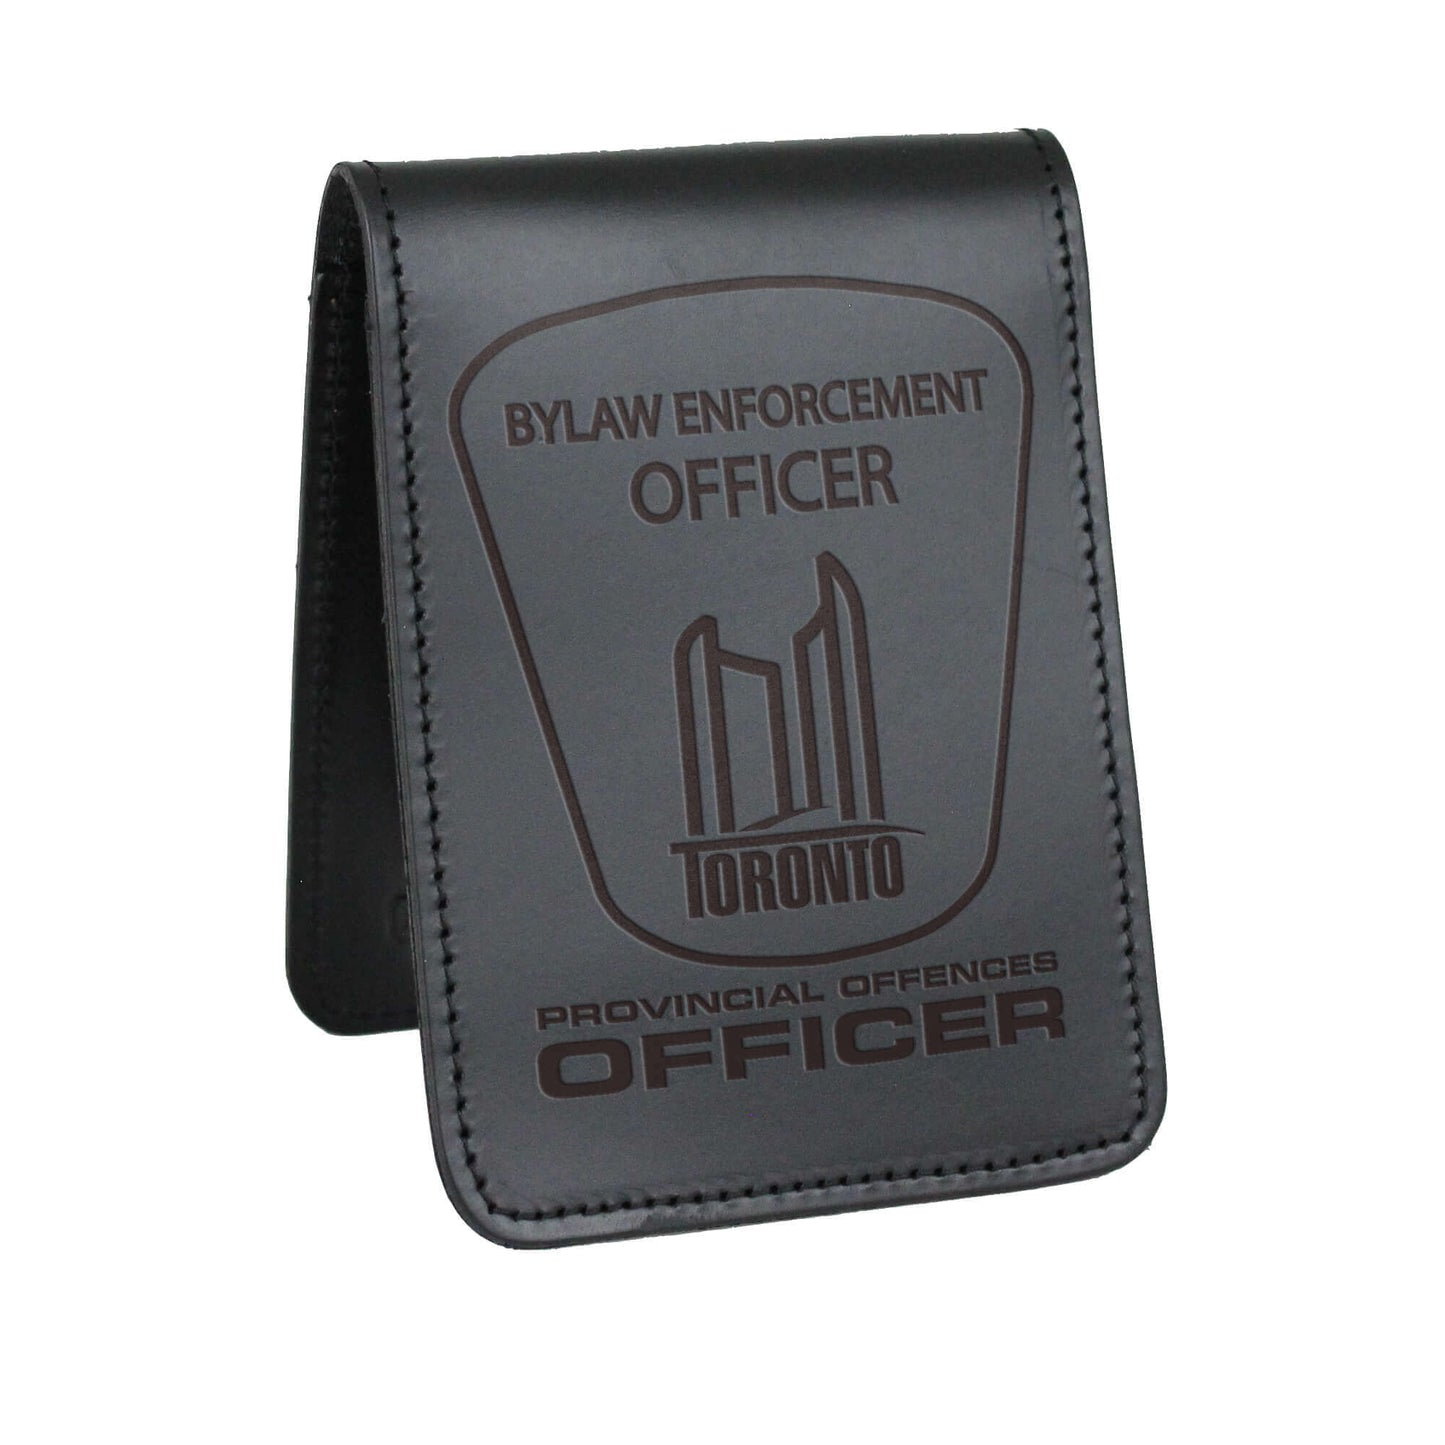 Toronto Bylaw Enforcement Notebook Cover